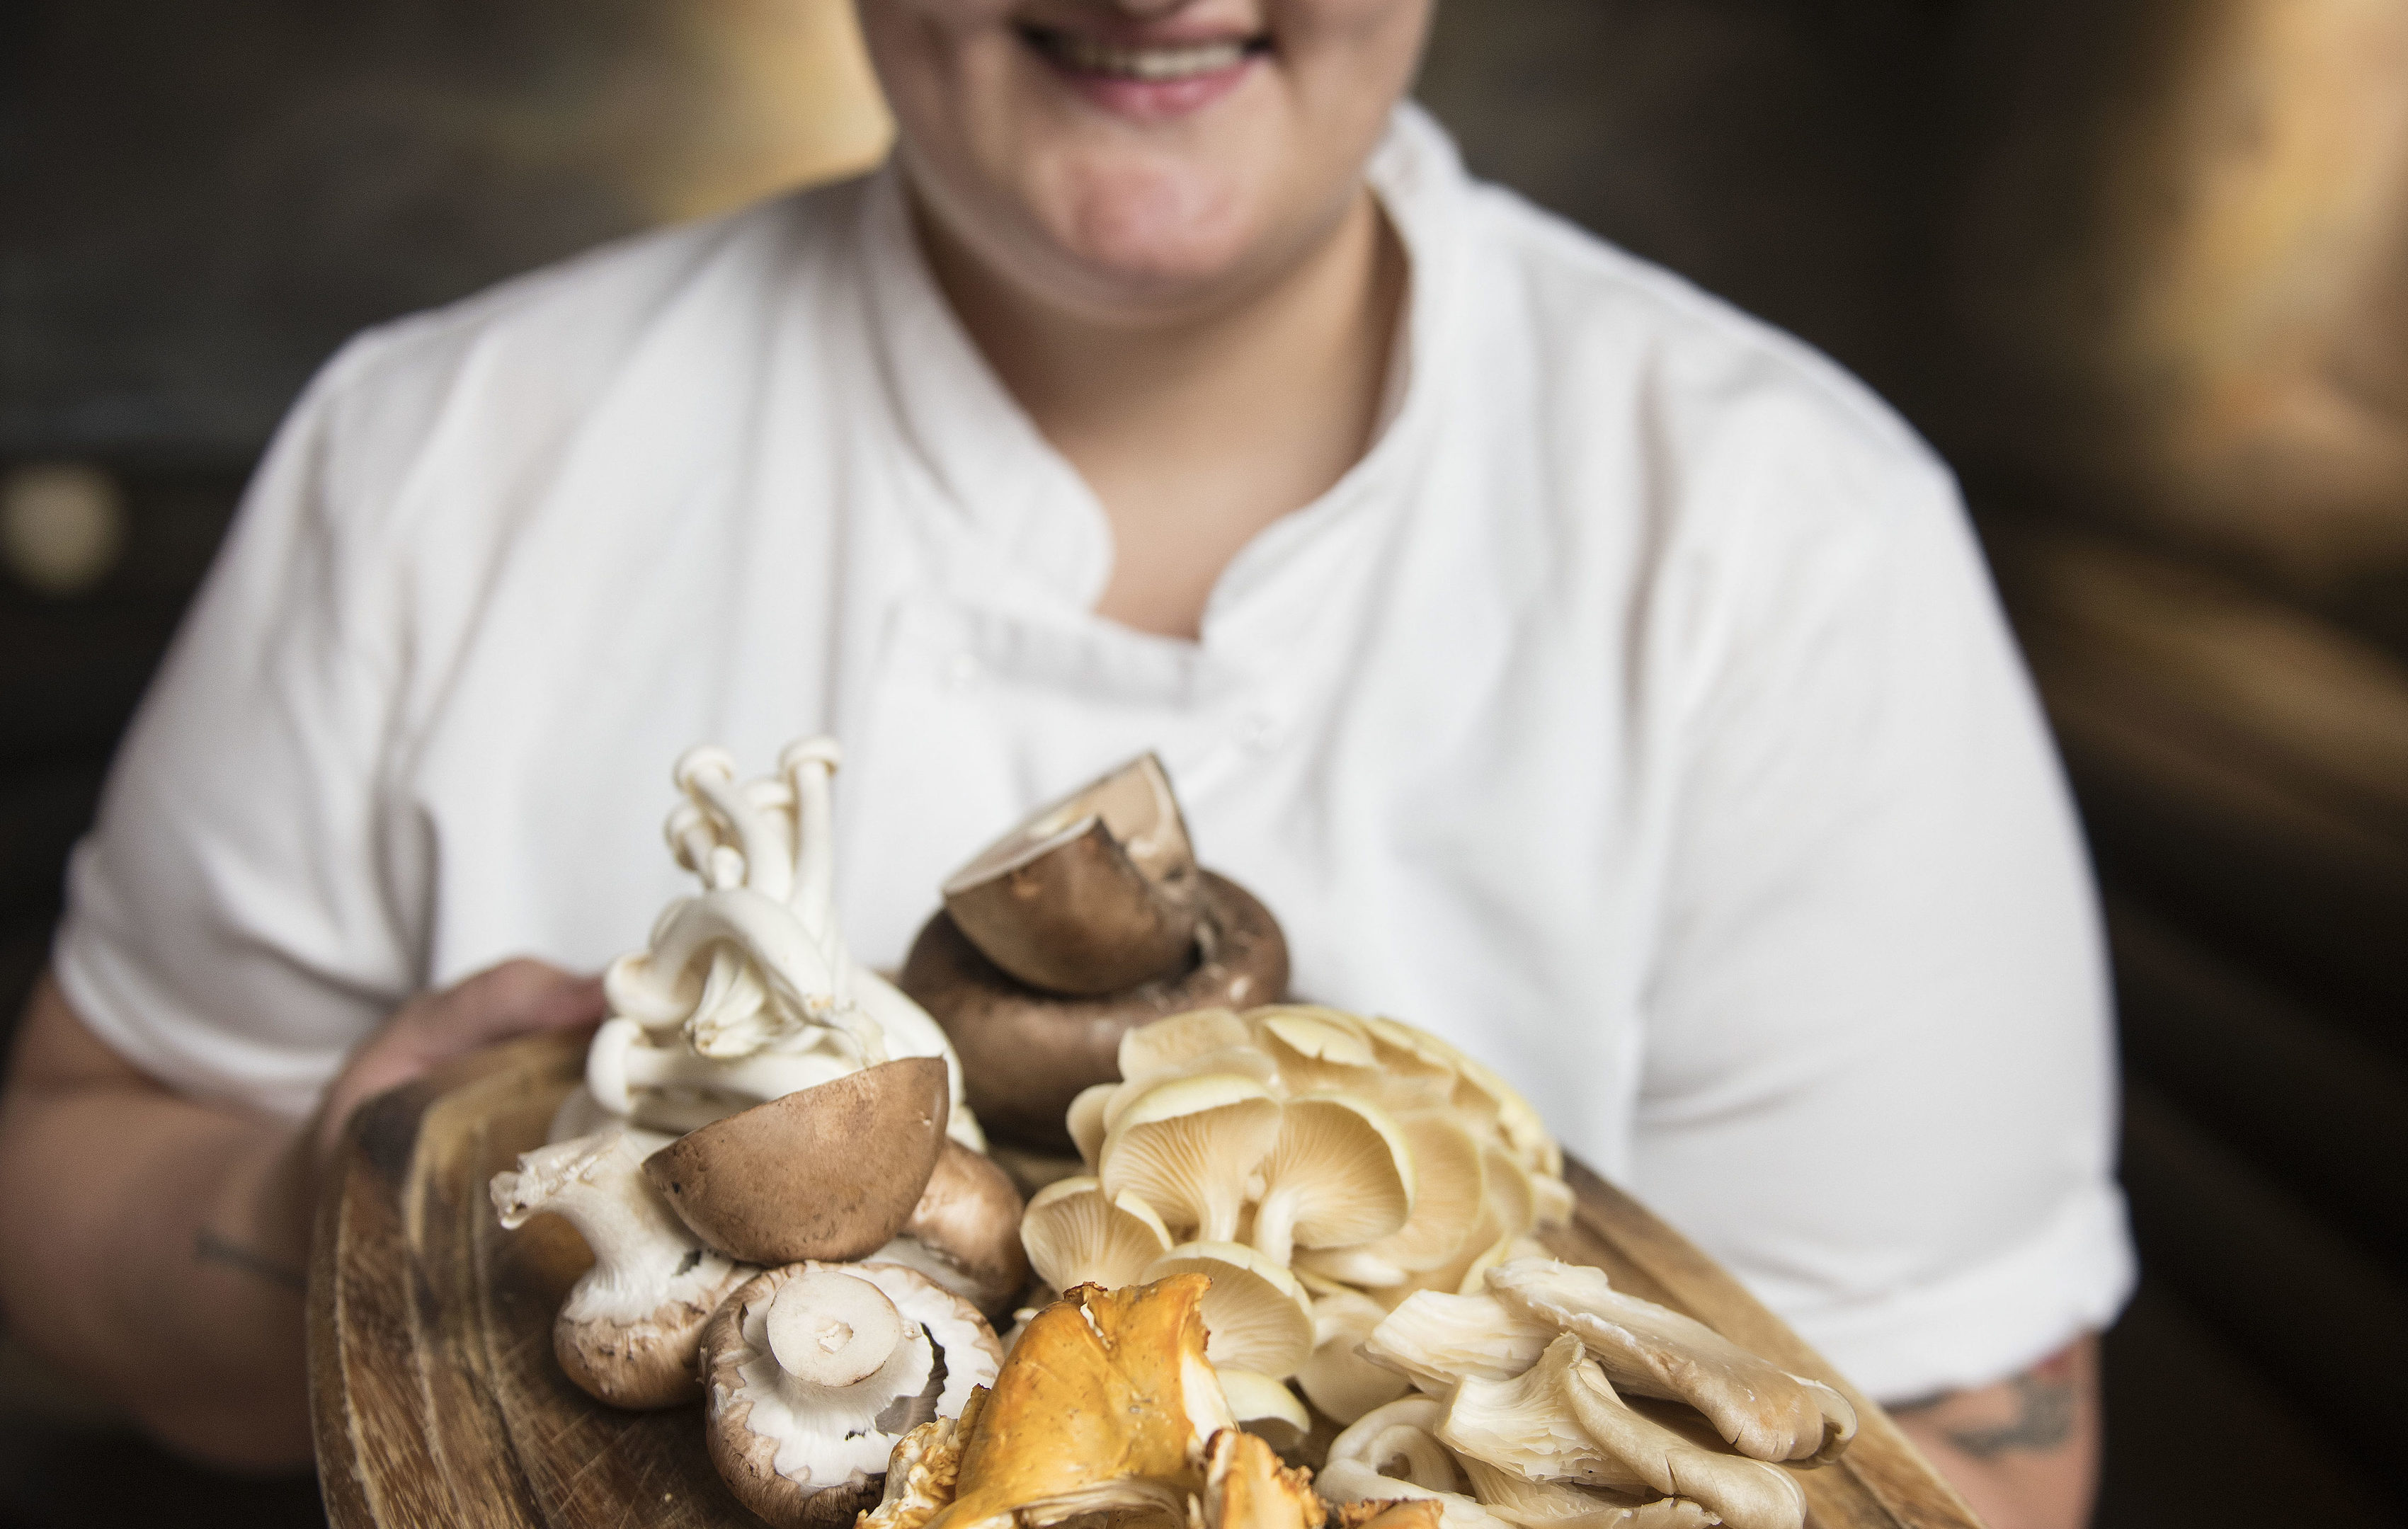 Mushrooms with head chef Yvonne Noon from Sisters restaurant in Glasgow
(Wattie Cheung)